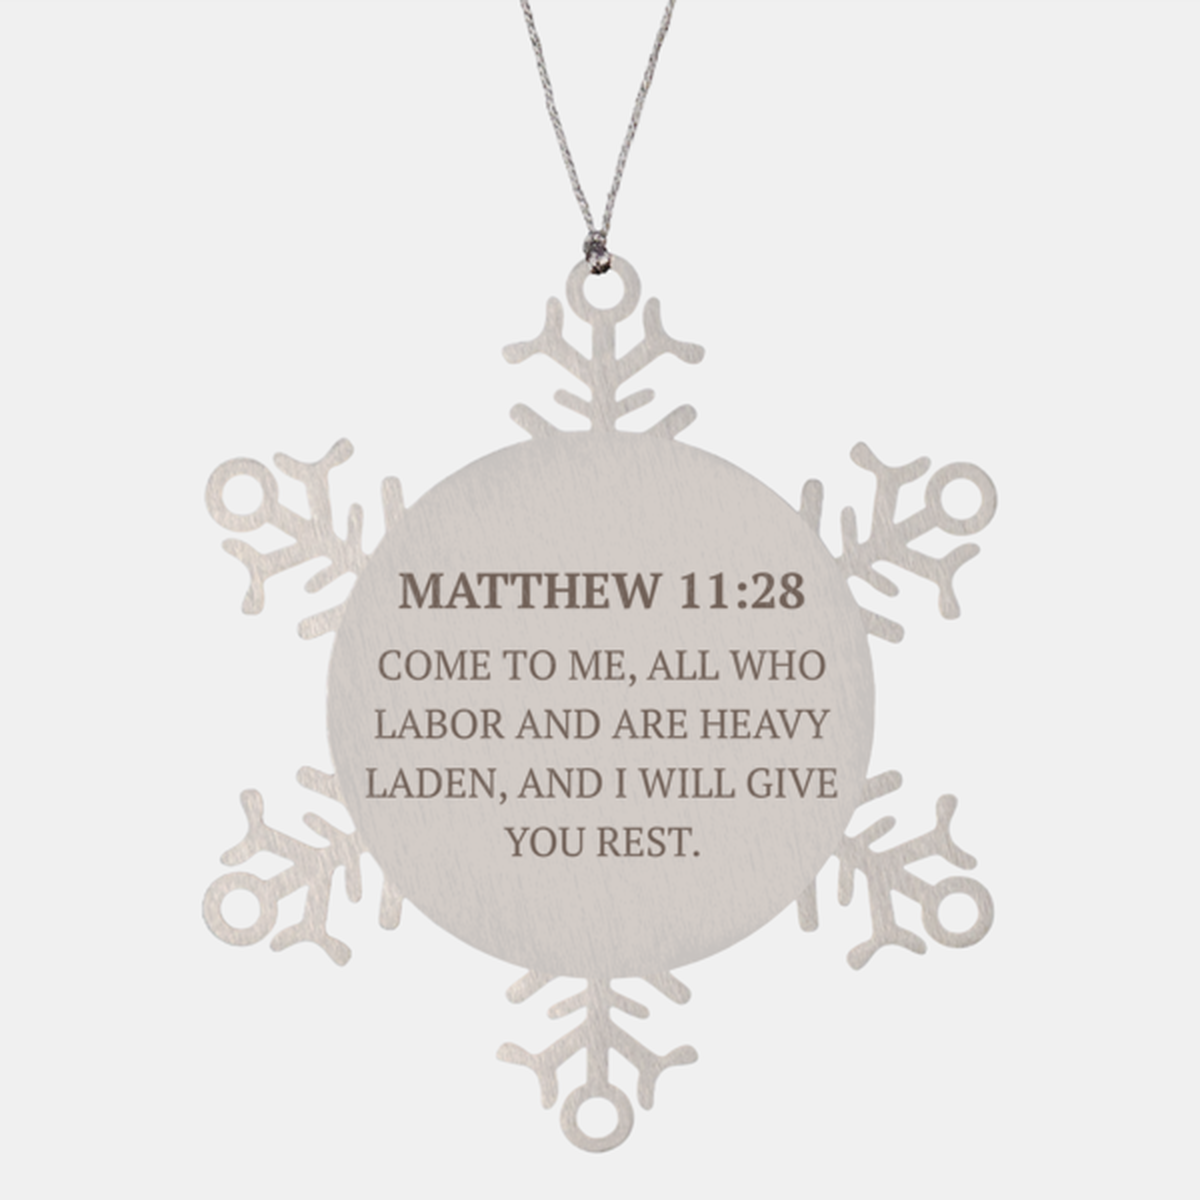 Christian Ornaments For Christmas Tree, Come To Me, All Who Labor And Are Heavy Laden, Religious Christmas Decorations, Scripture Ornaments Gifts, Bible Verse Ornament